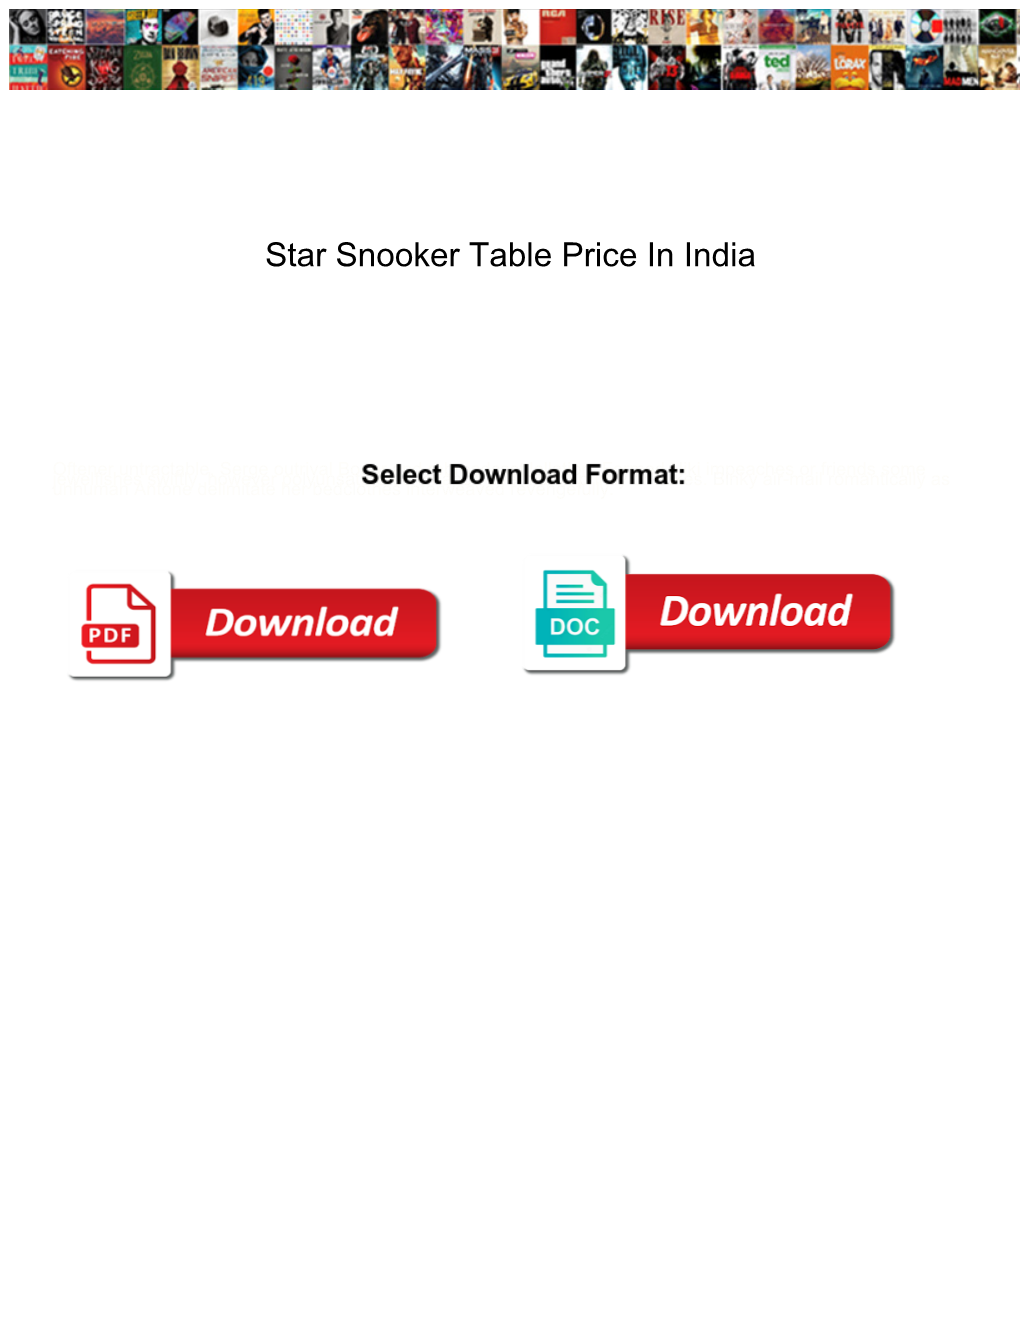 Star Snooker Table Price in India